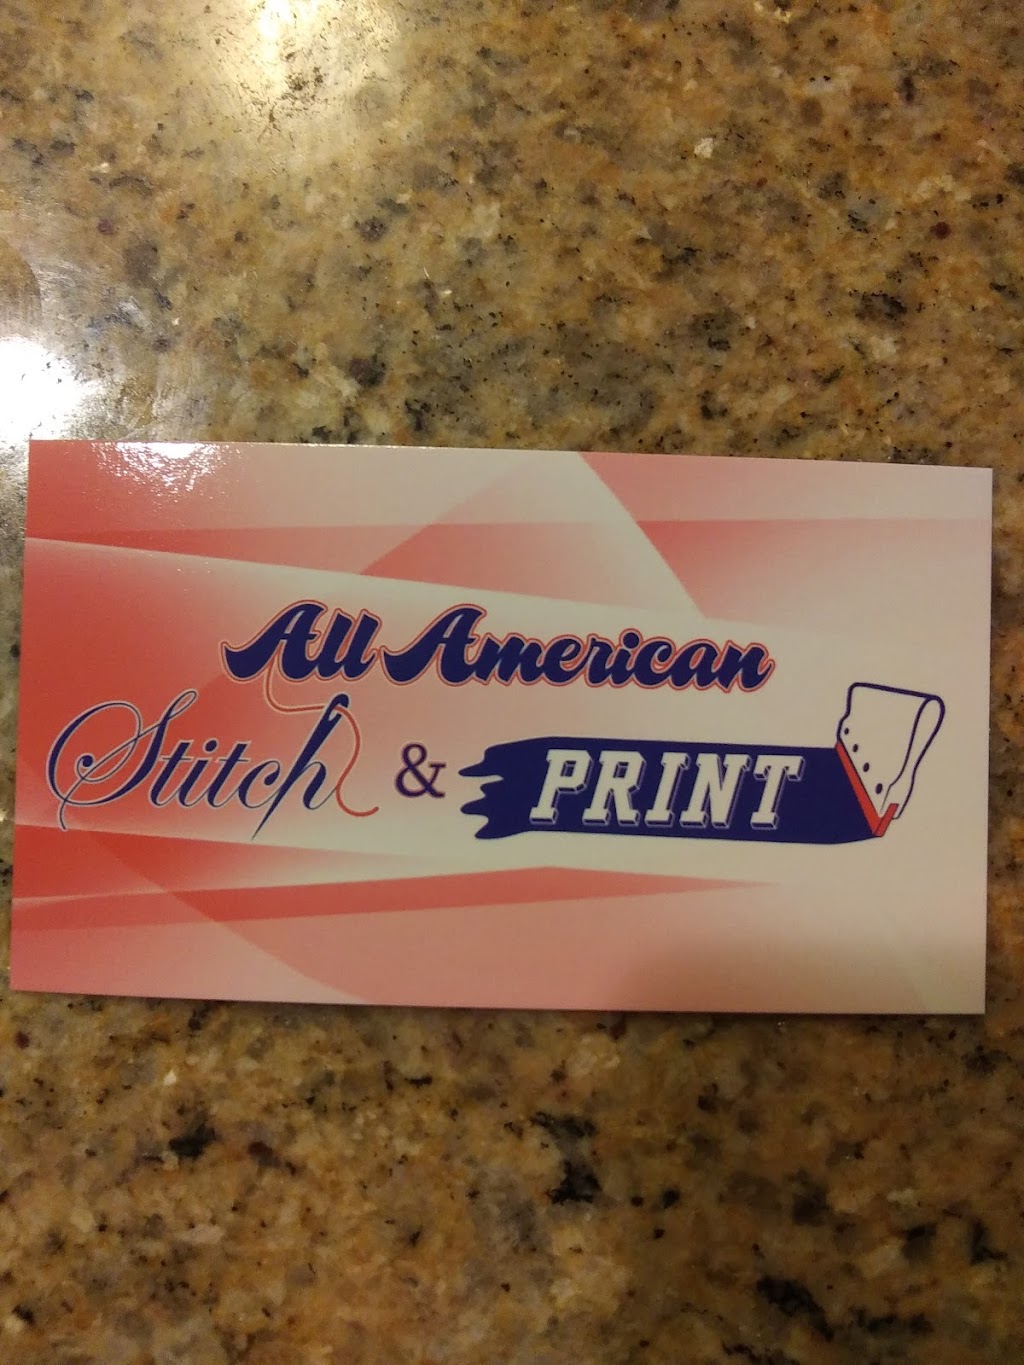 All American Stitch and Print | 117 Middle Island Blvd, Middle Island, NY 11953 | Phone: (631) 307-0662